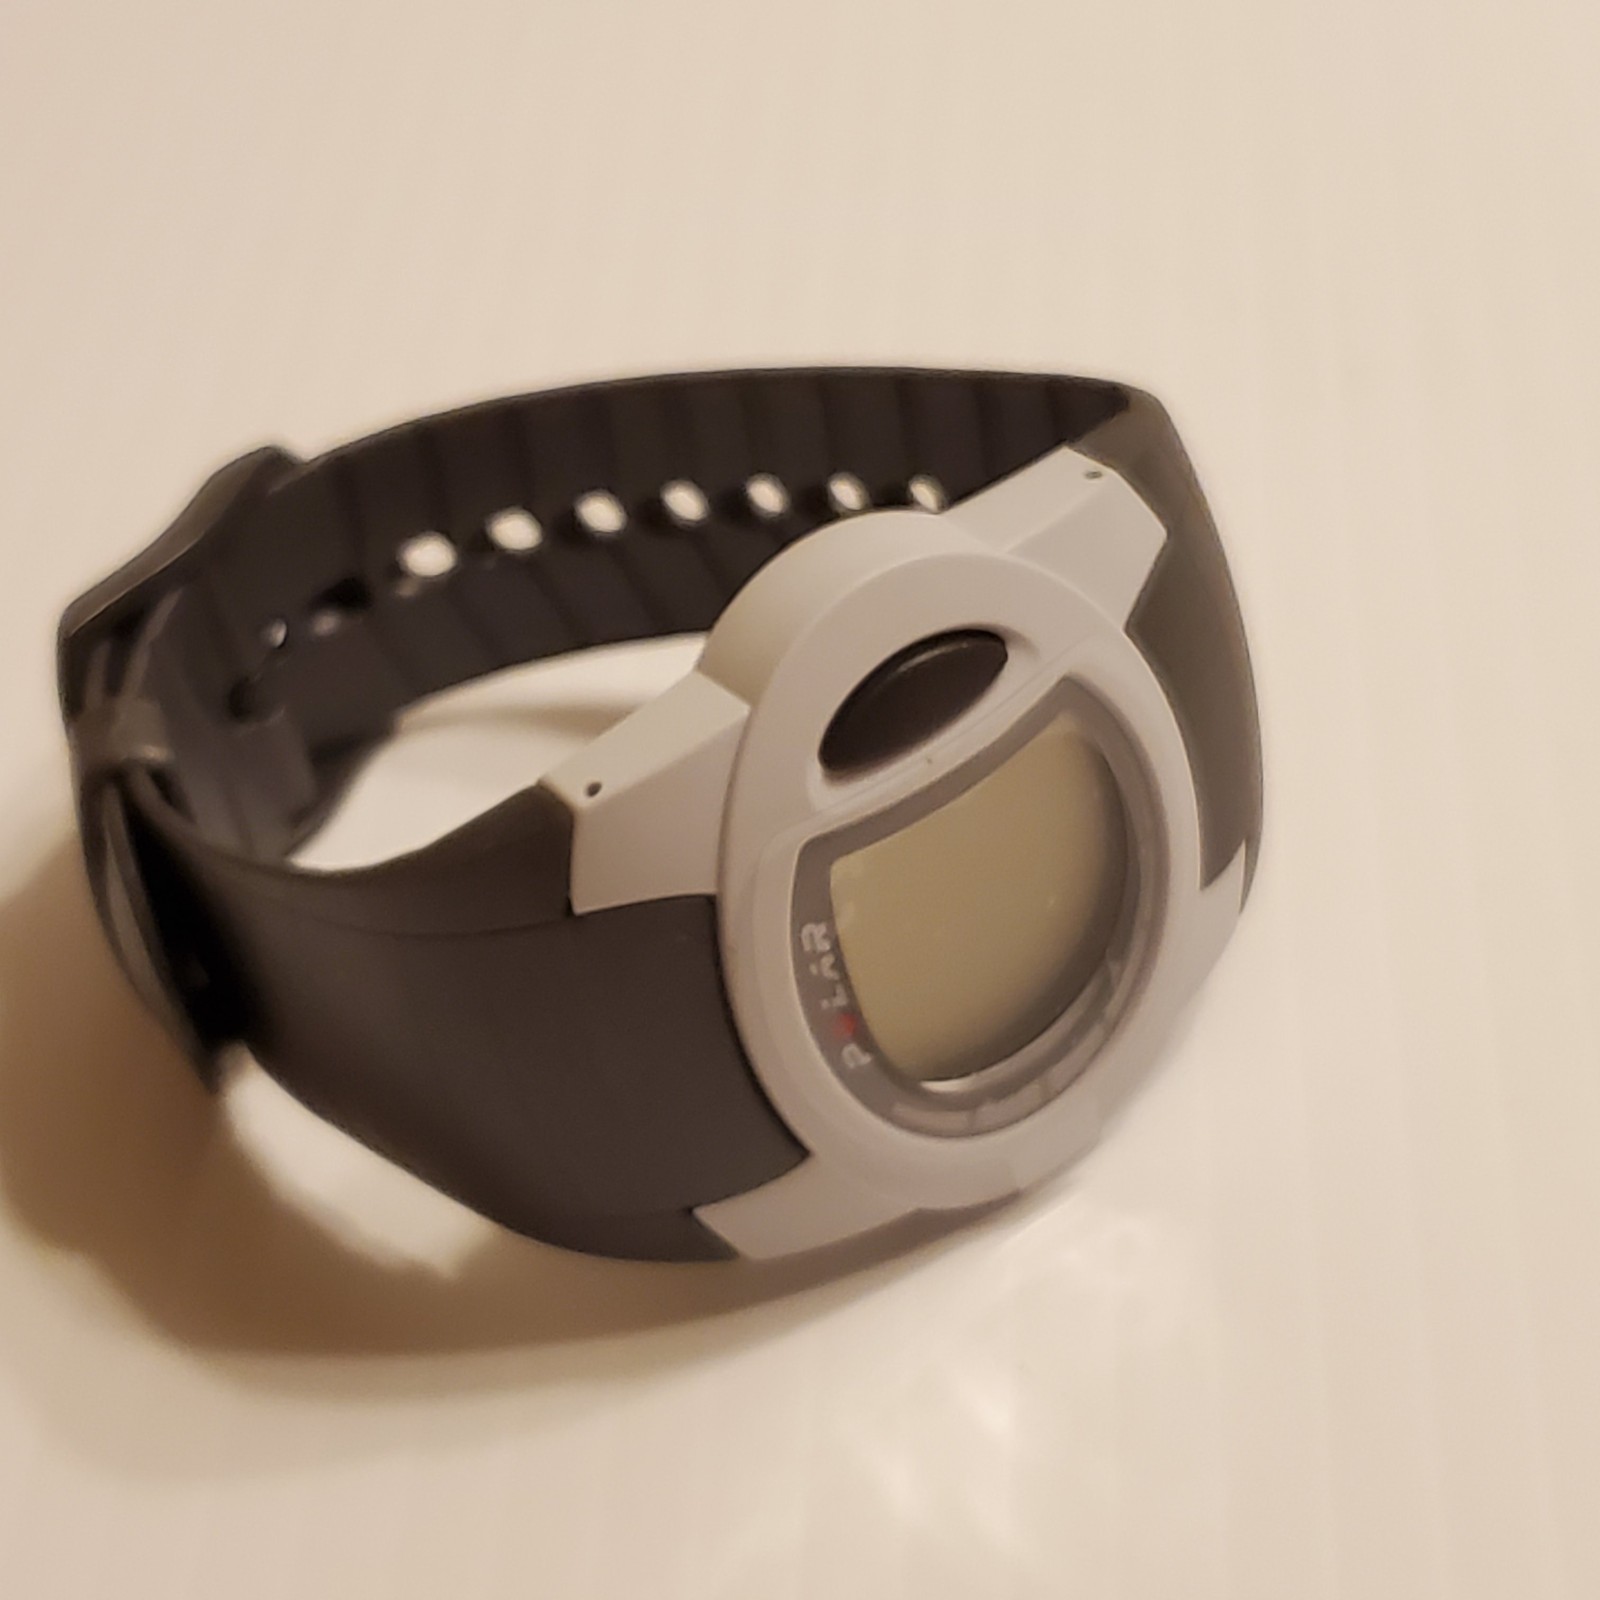 Polar Electro F1+ Heart Rate monitor watch CE0537 - $26.00